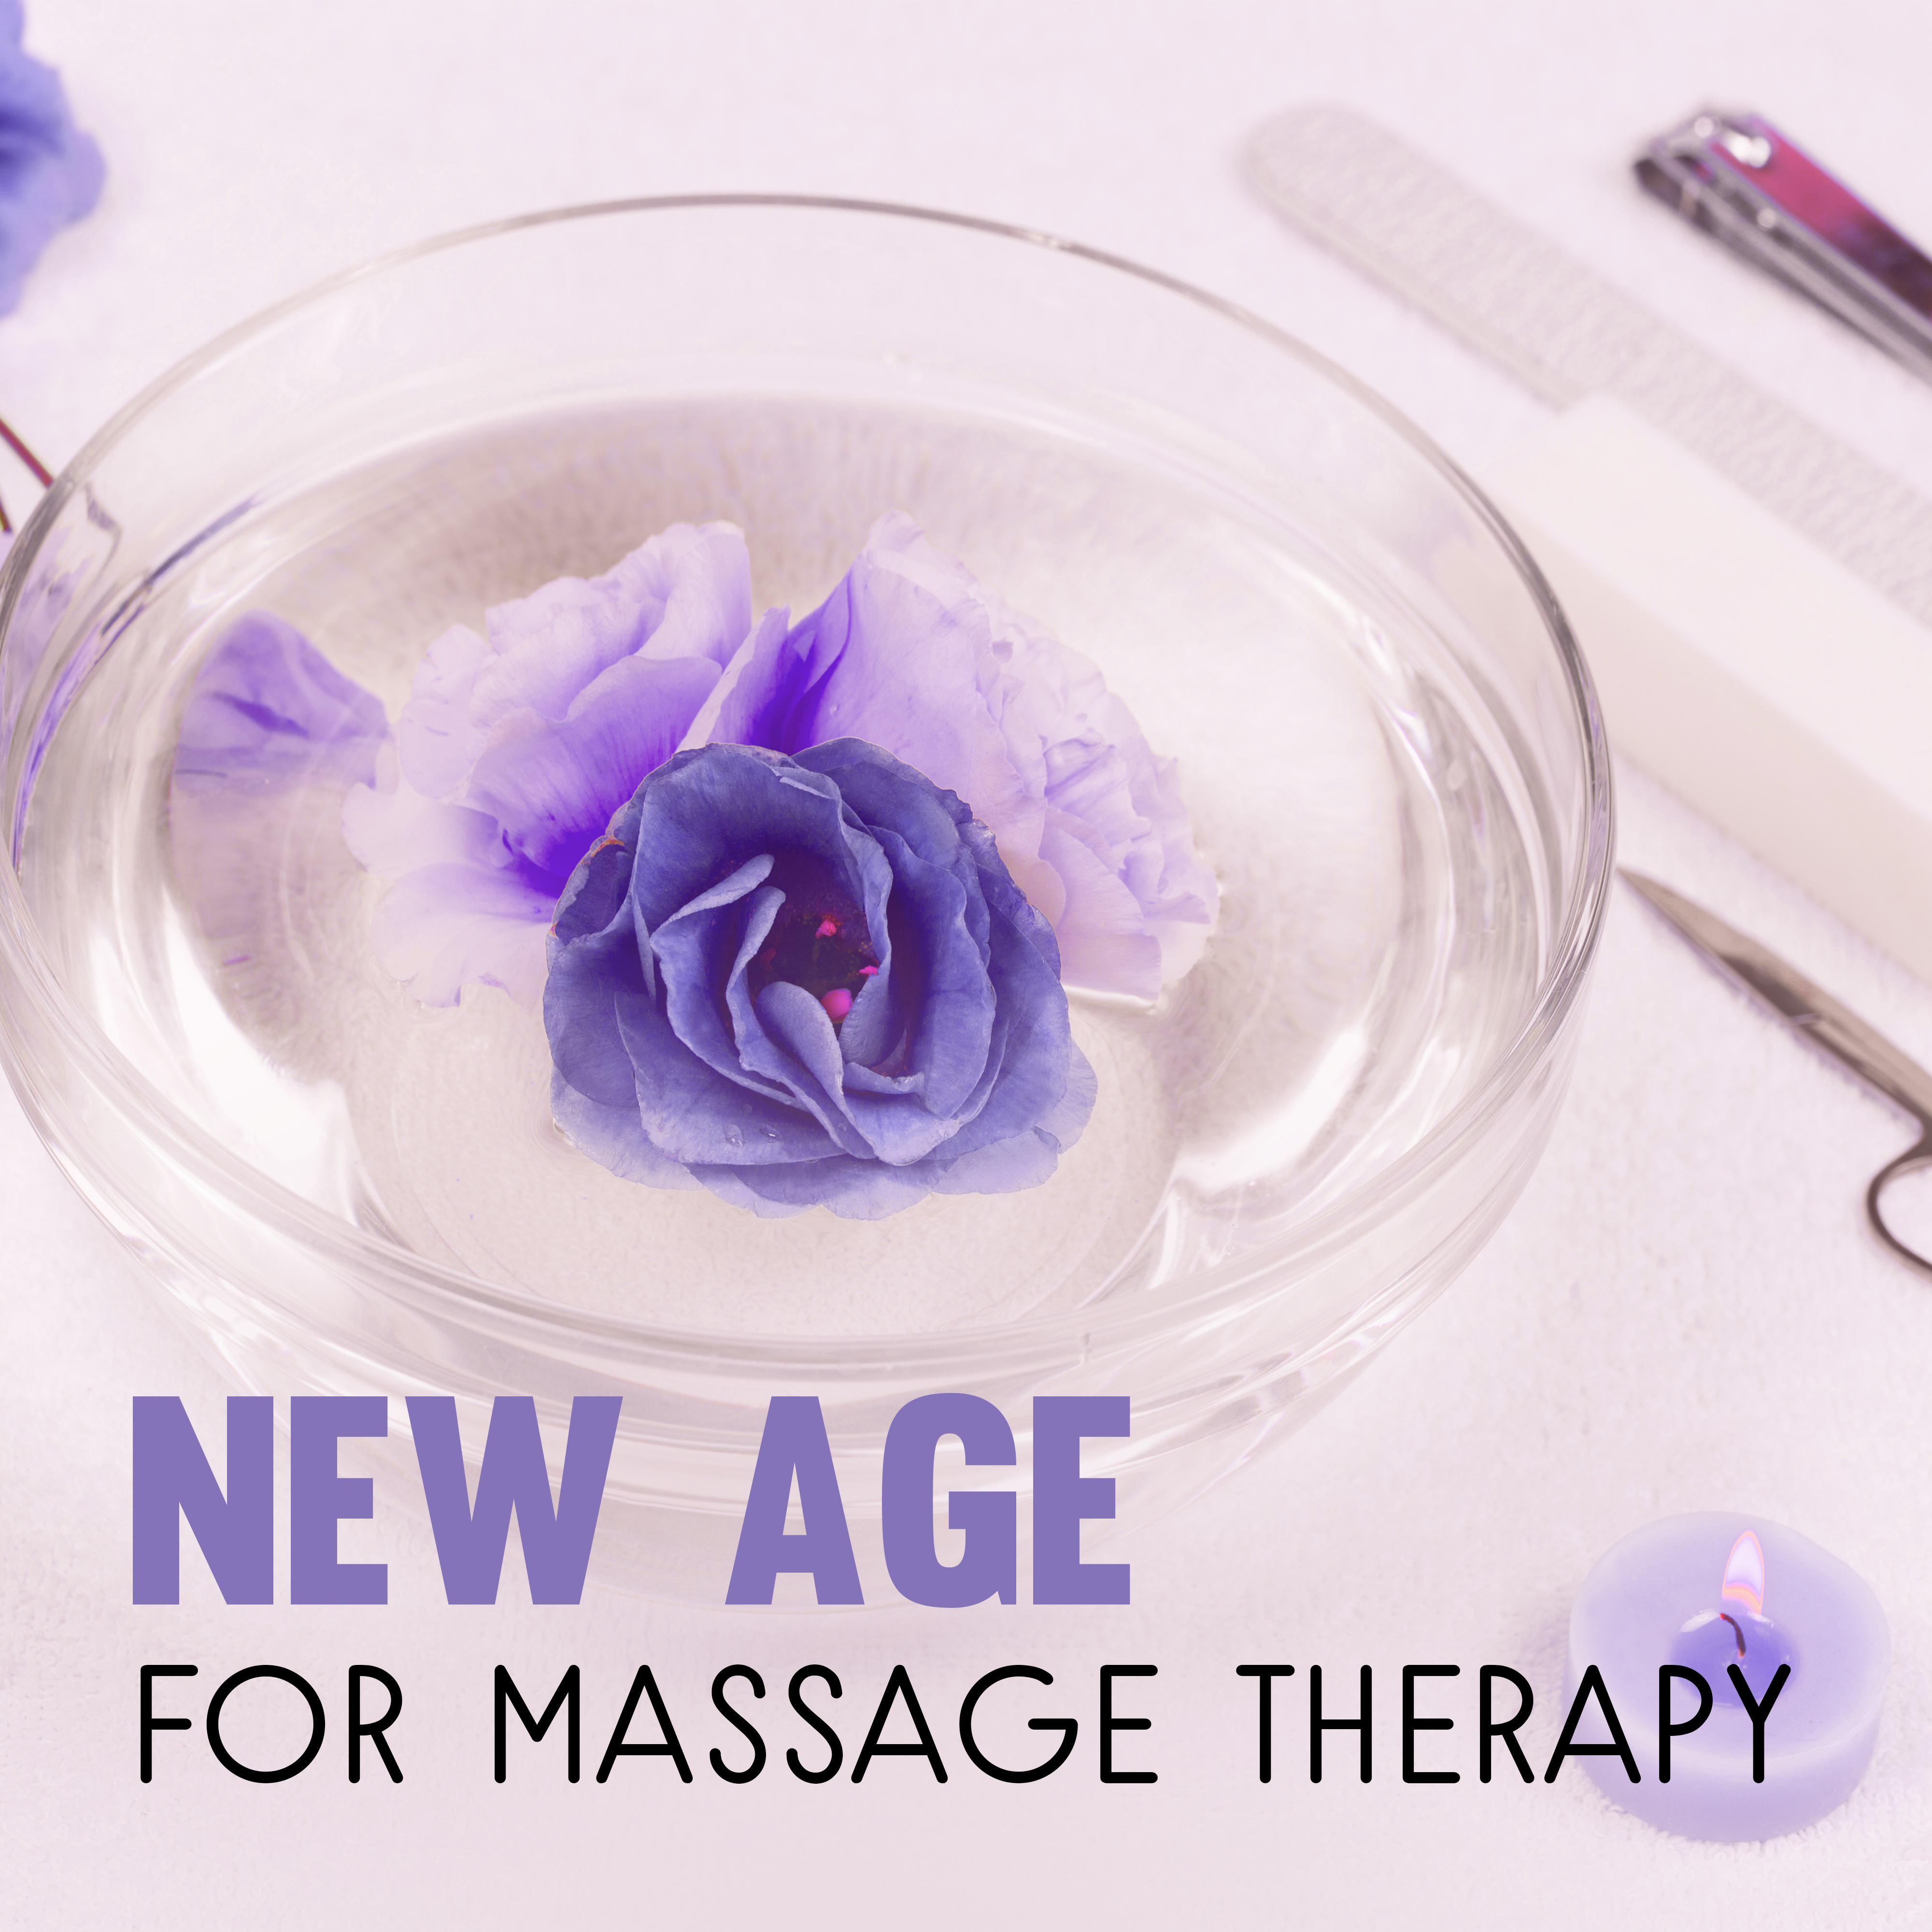 New Age for Massage Therapy – Zen Sensations , Relaxation Spa, Beauty Lounge, Deep Sounds of Nature, Pure Therapy Music